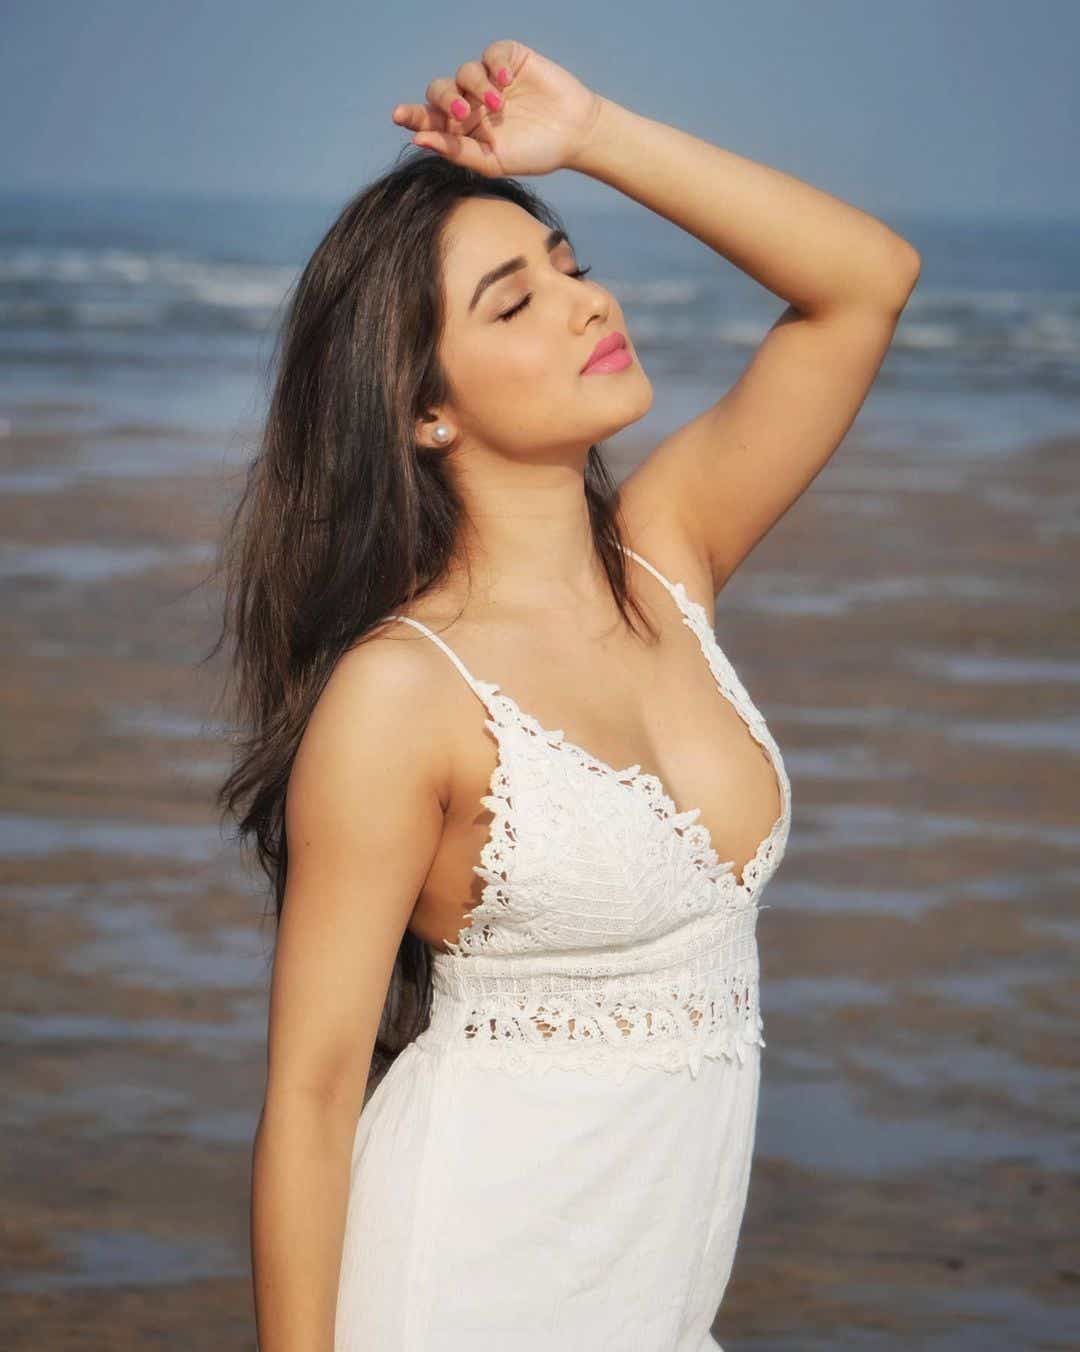 Donal Bisht hot cleavage images